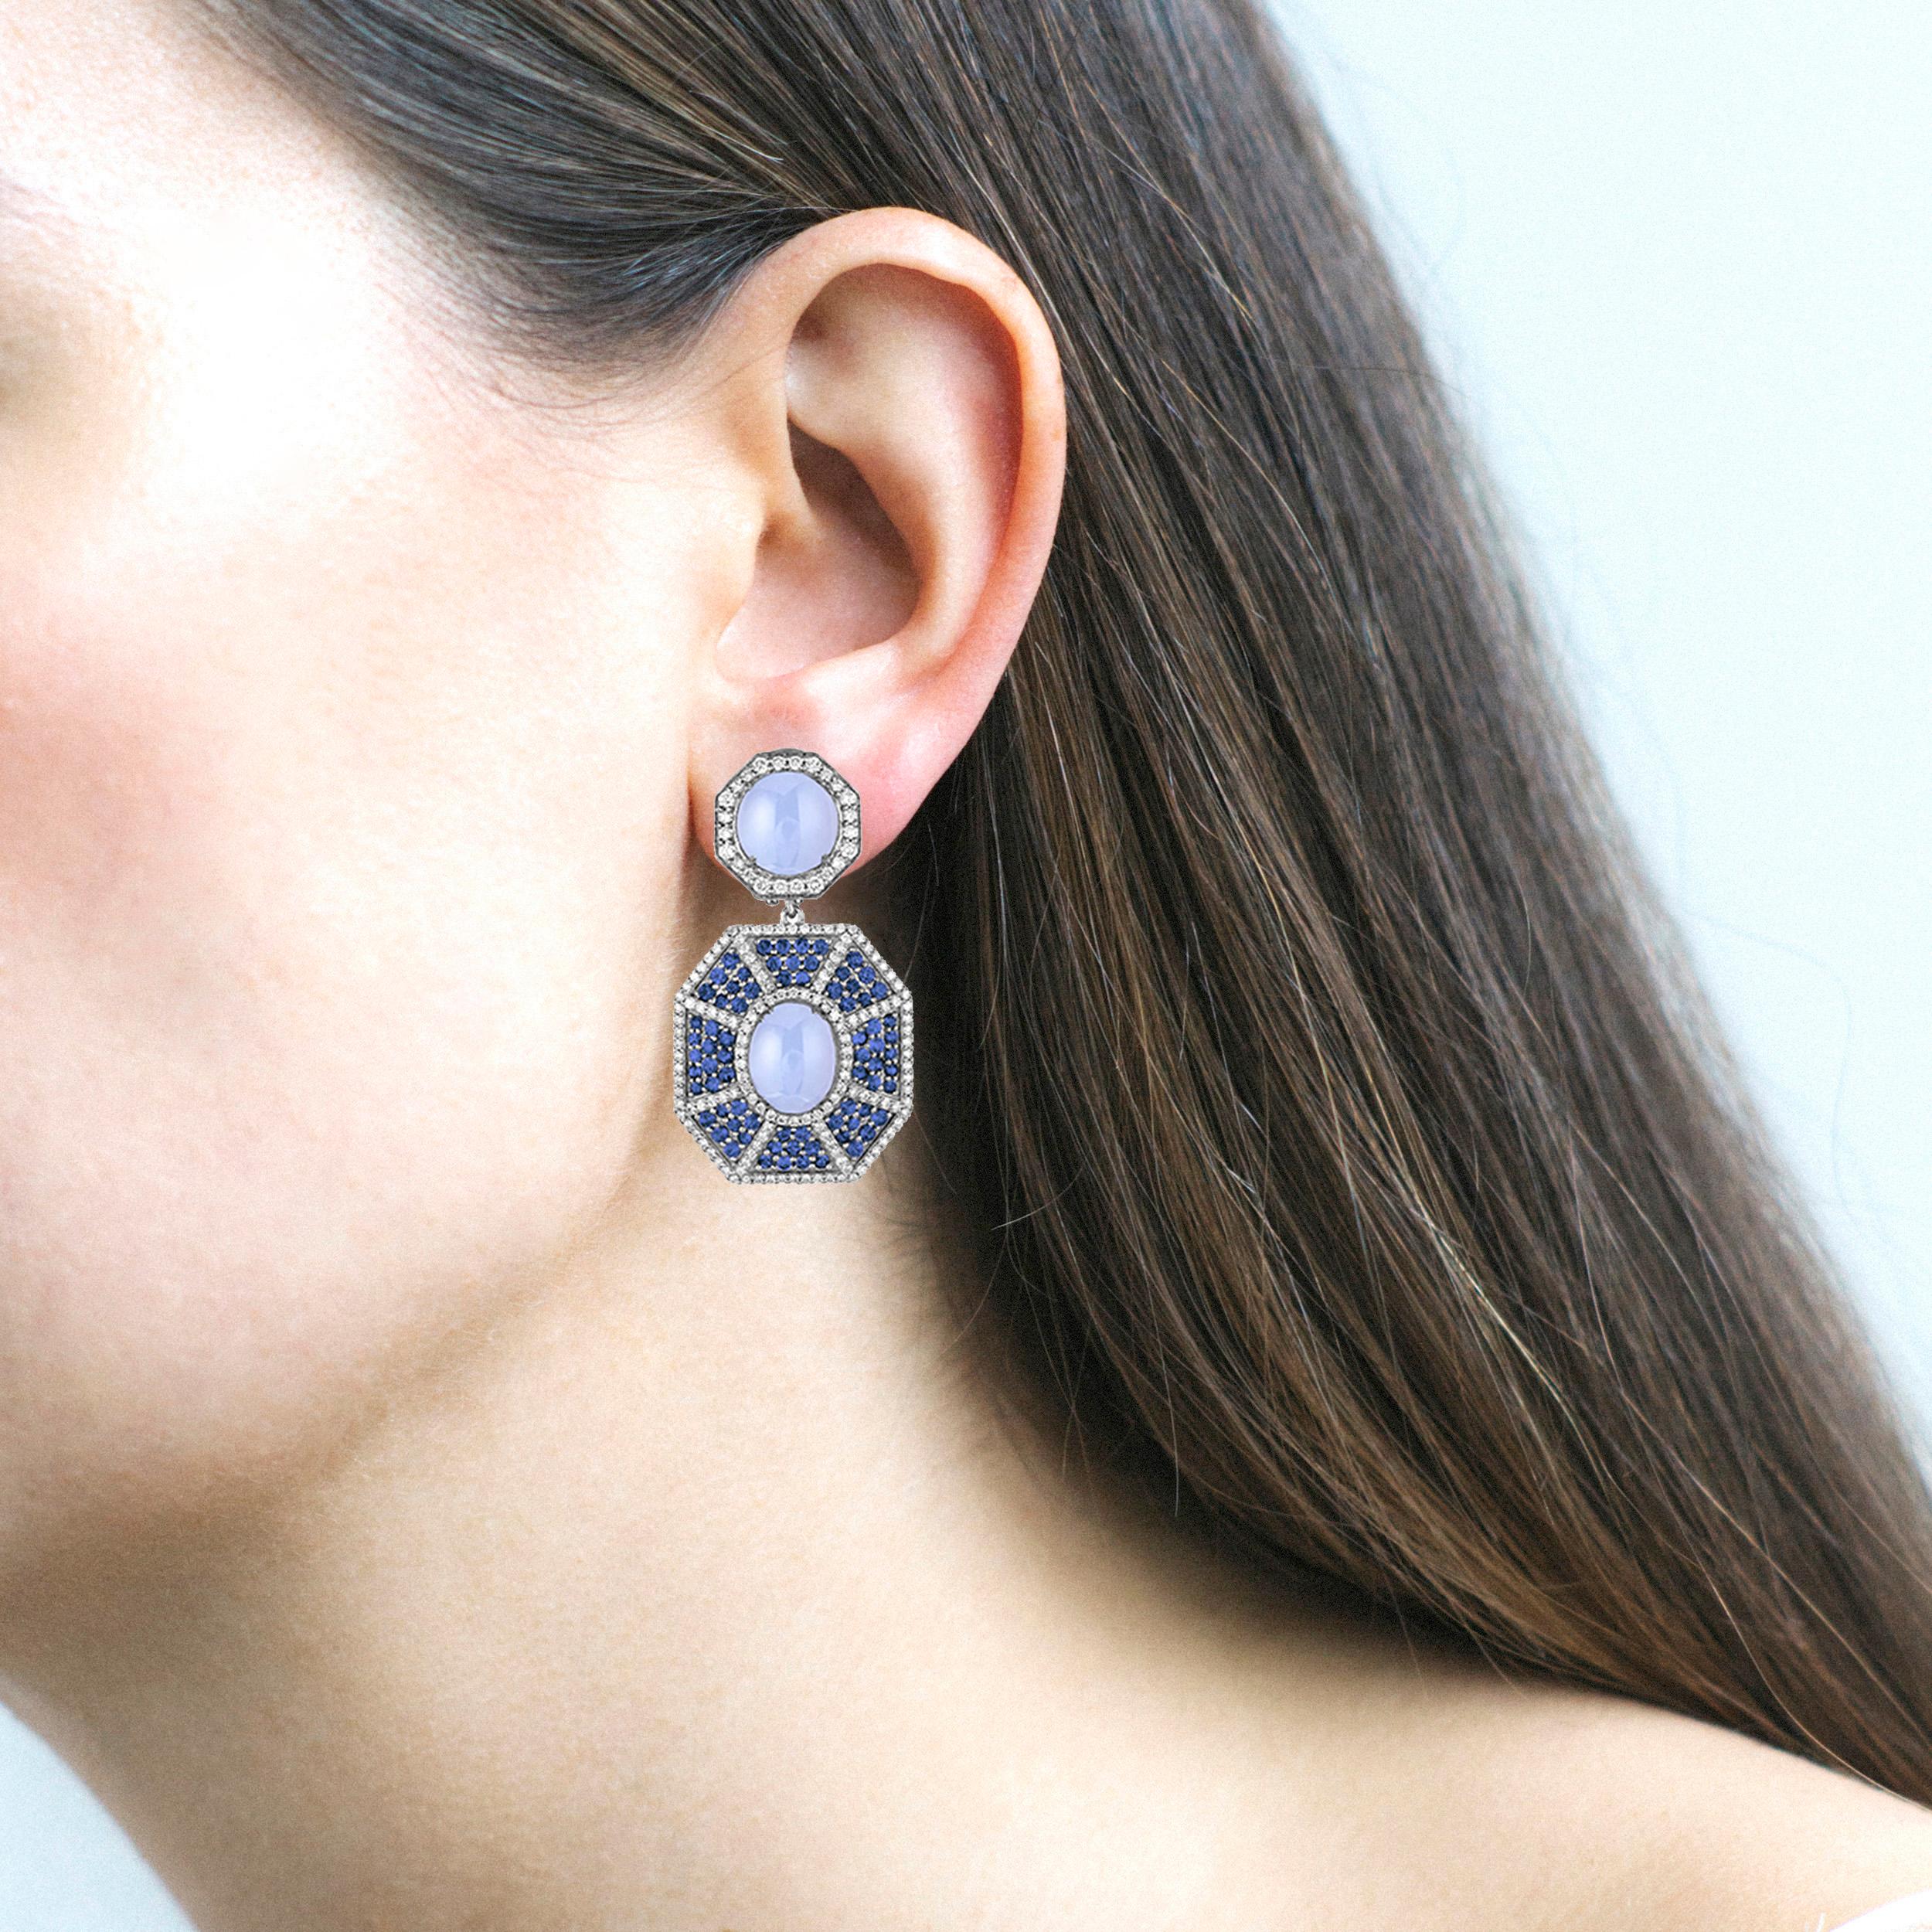 Blue Chalcedony Double Octagon Earrings with Sapphire & Diamonds in 18K White Gold, from 'Limited Edition' Collection

Stone Size: 8 & 9 x 7 mm

Gemstone Weight: Chalcedony- 4.27 Carats 
                                Sapphire- 1.88